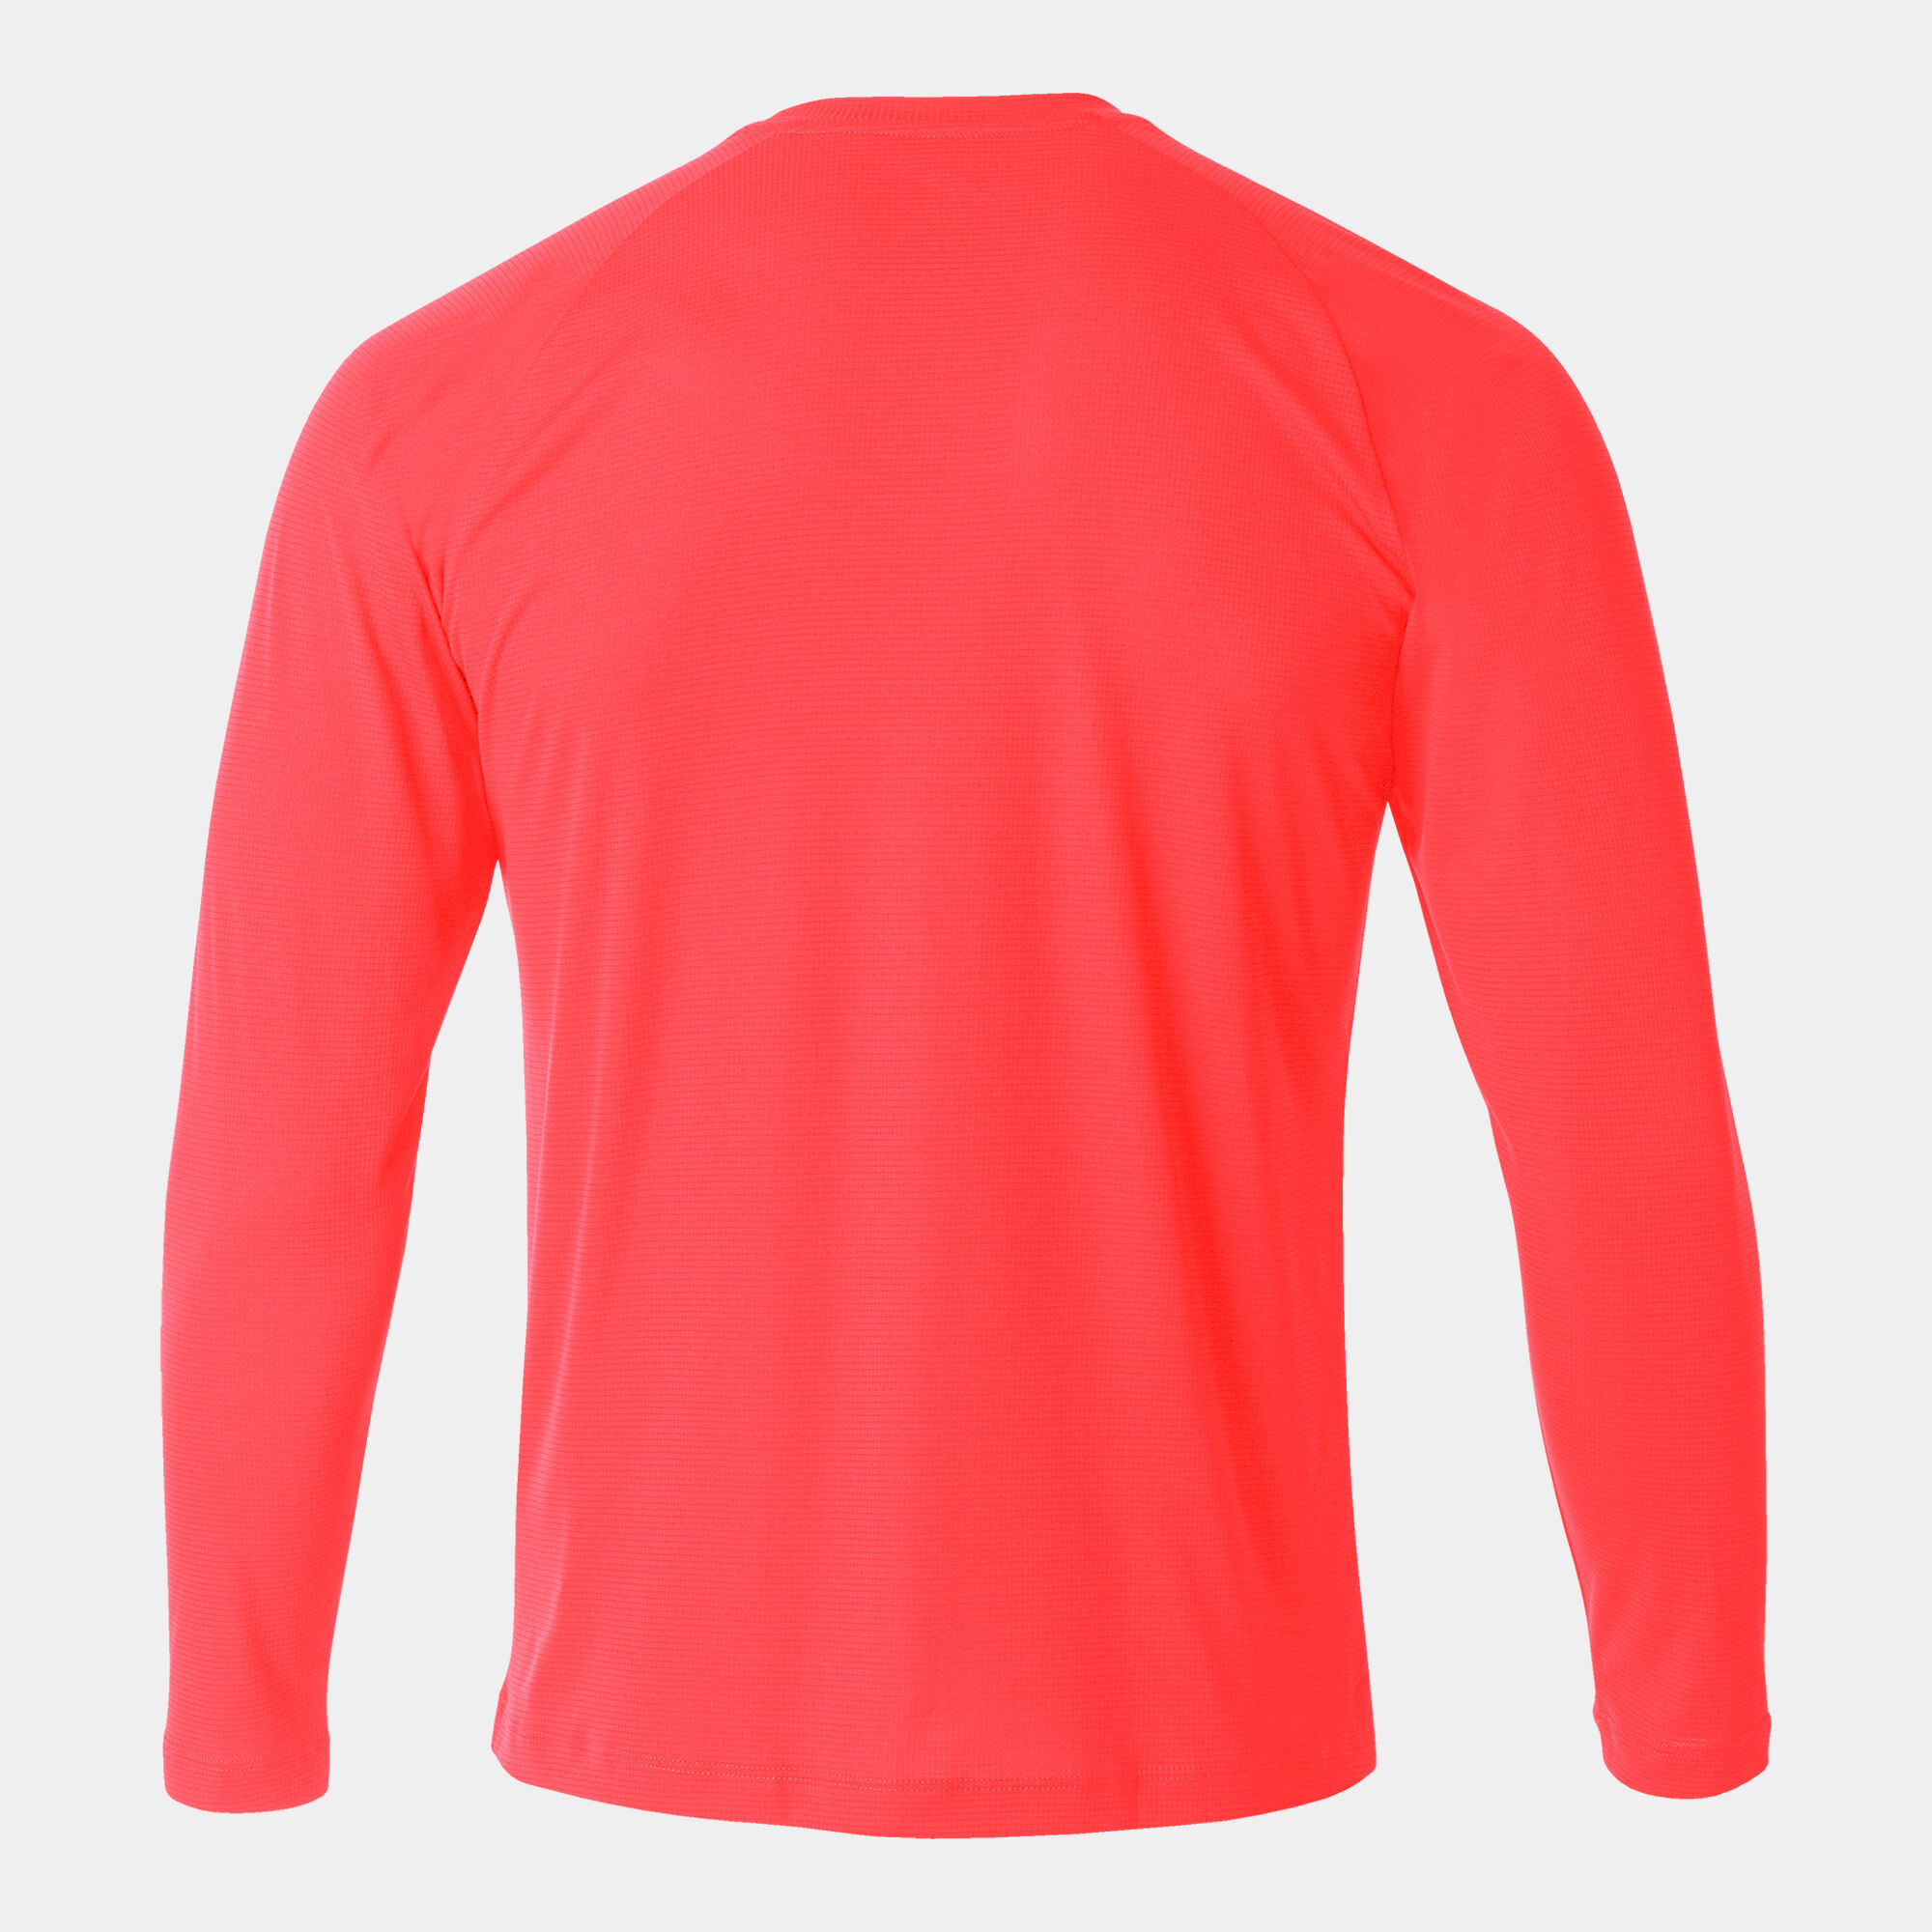 MAILLOT MANCHES LONGUES HOMME R-COMBI CORAIL FLUO